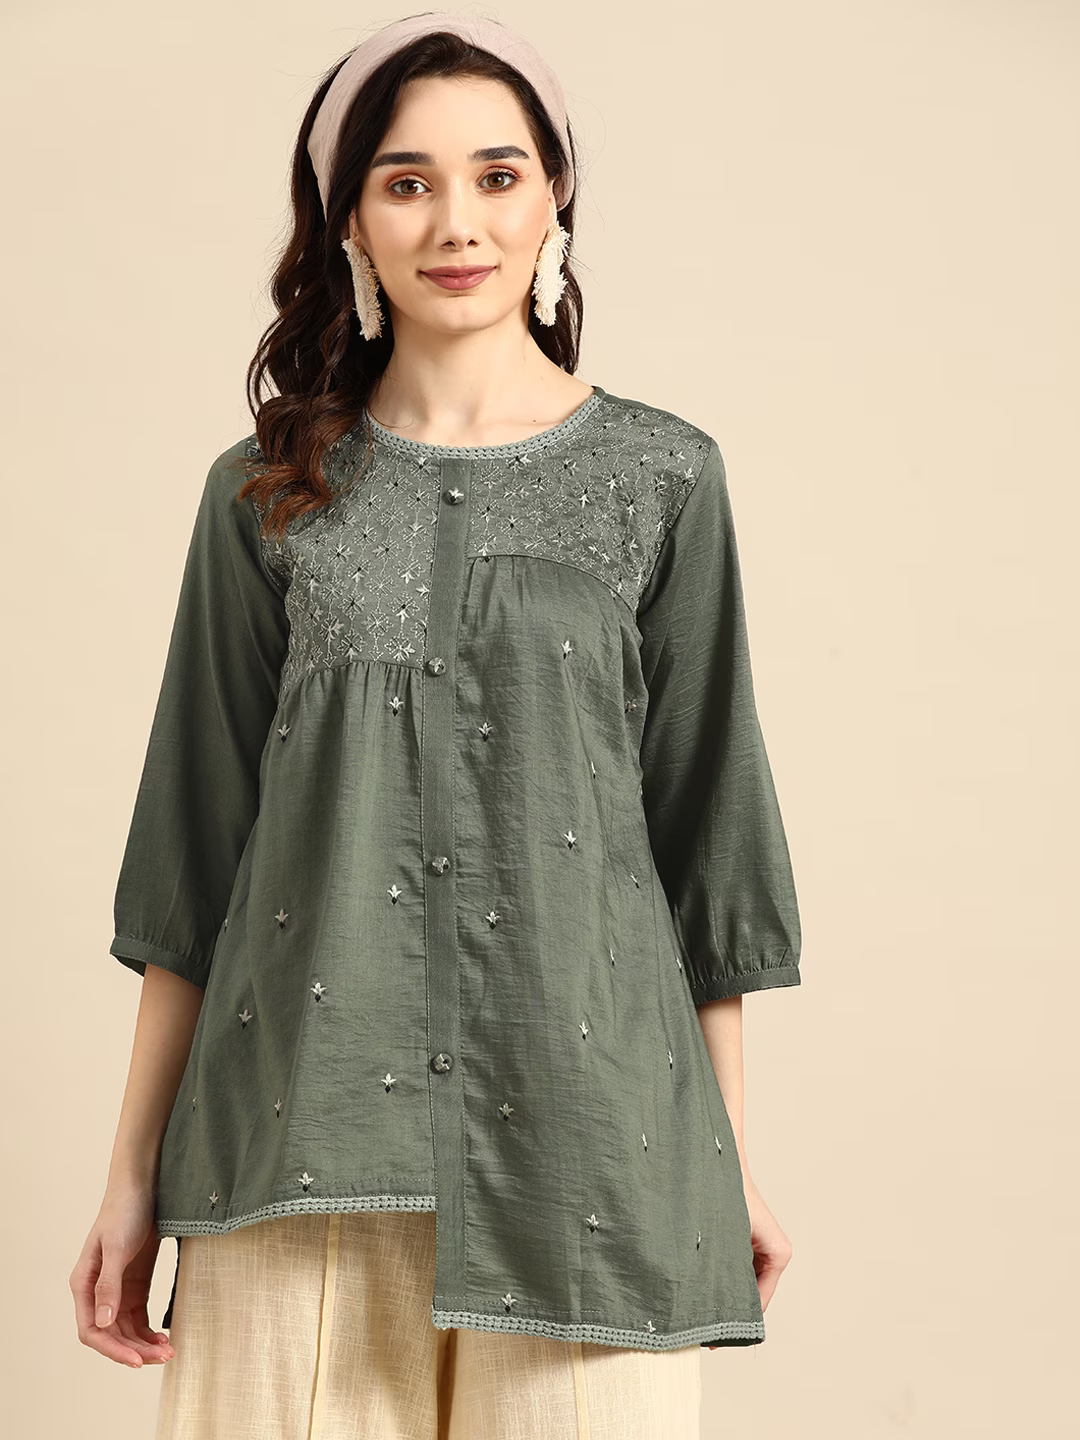 Olive Green Embroidered Longline Top